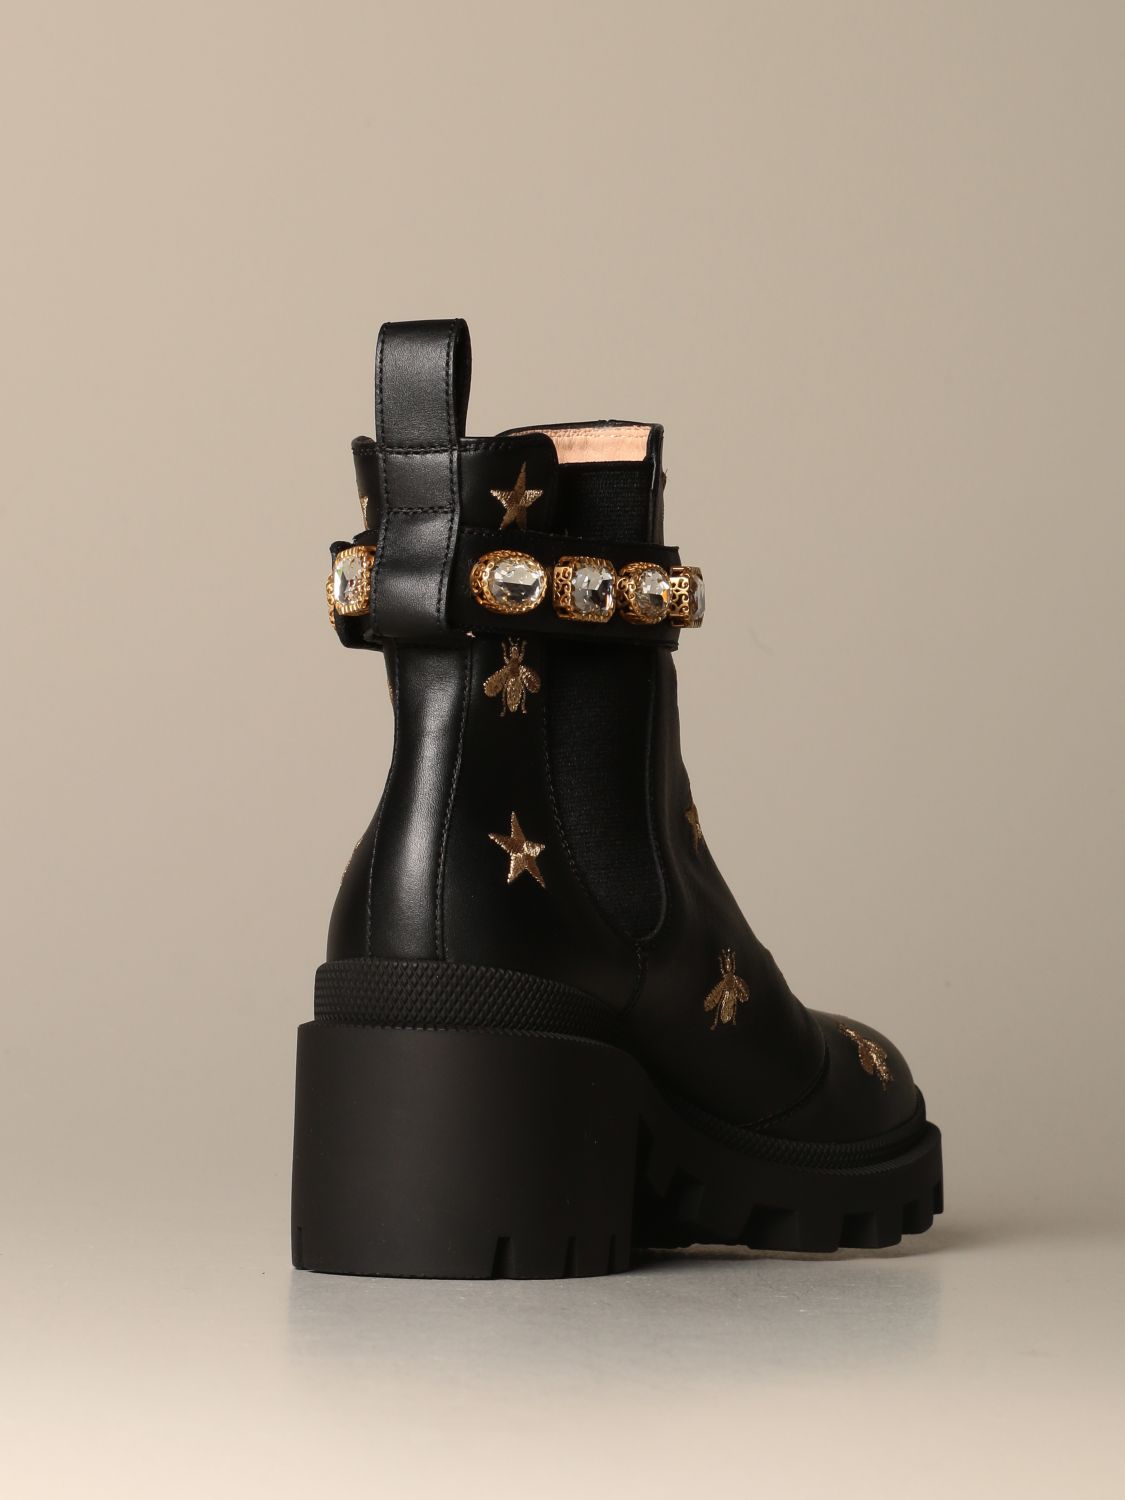 bee gucci boots